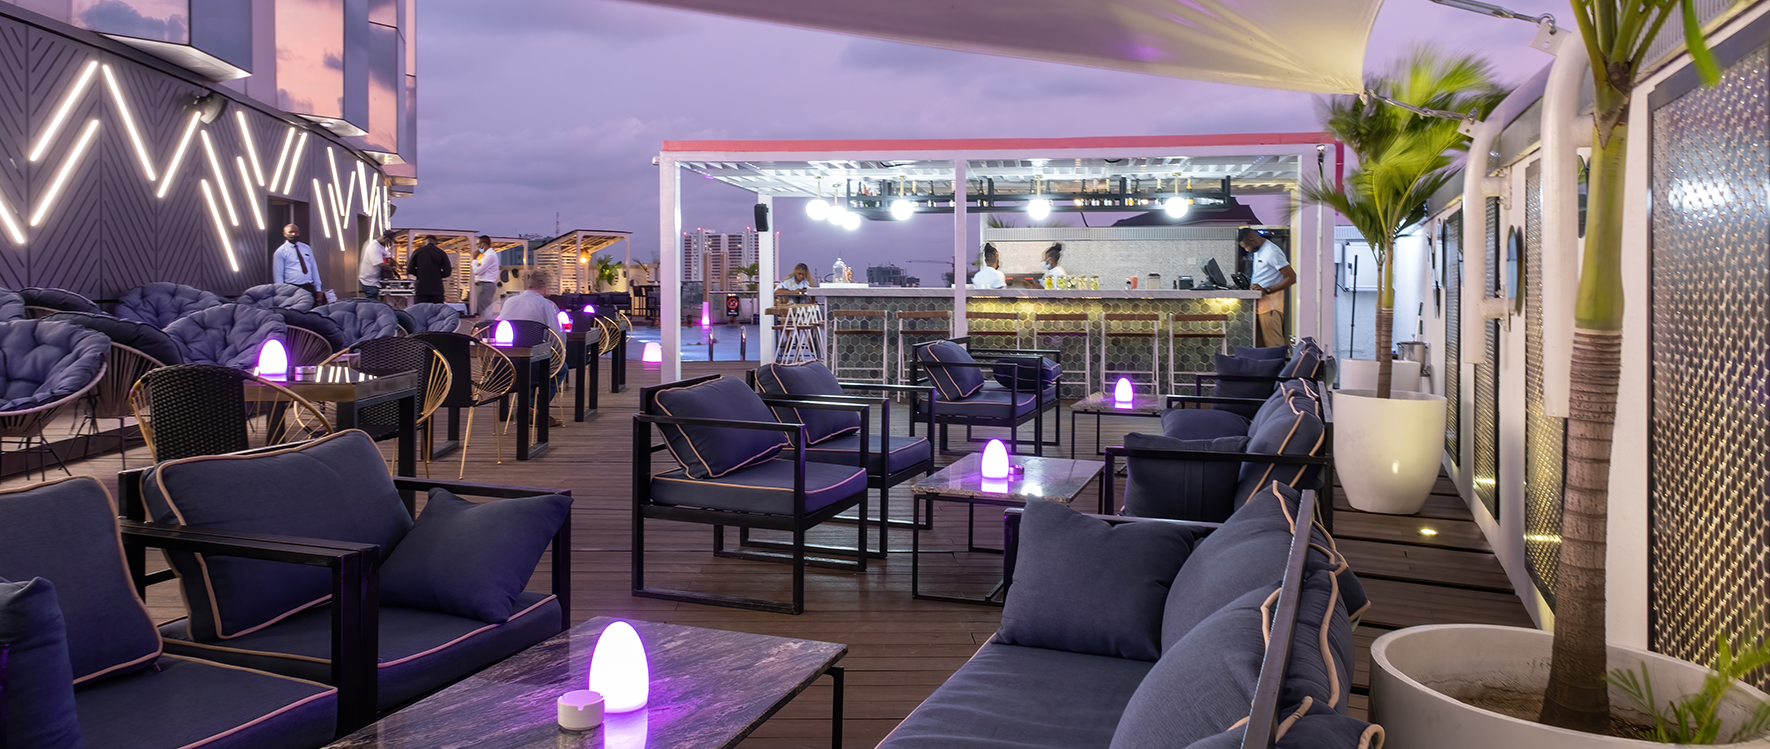 Dive into Luxury at Sugar 52: 
Where Business Meets Pleasure
